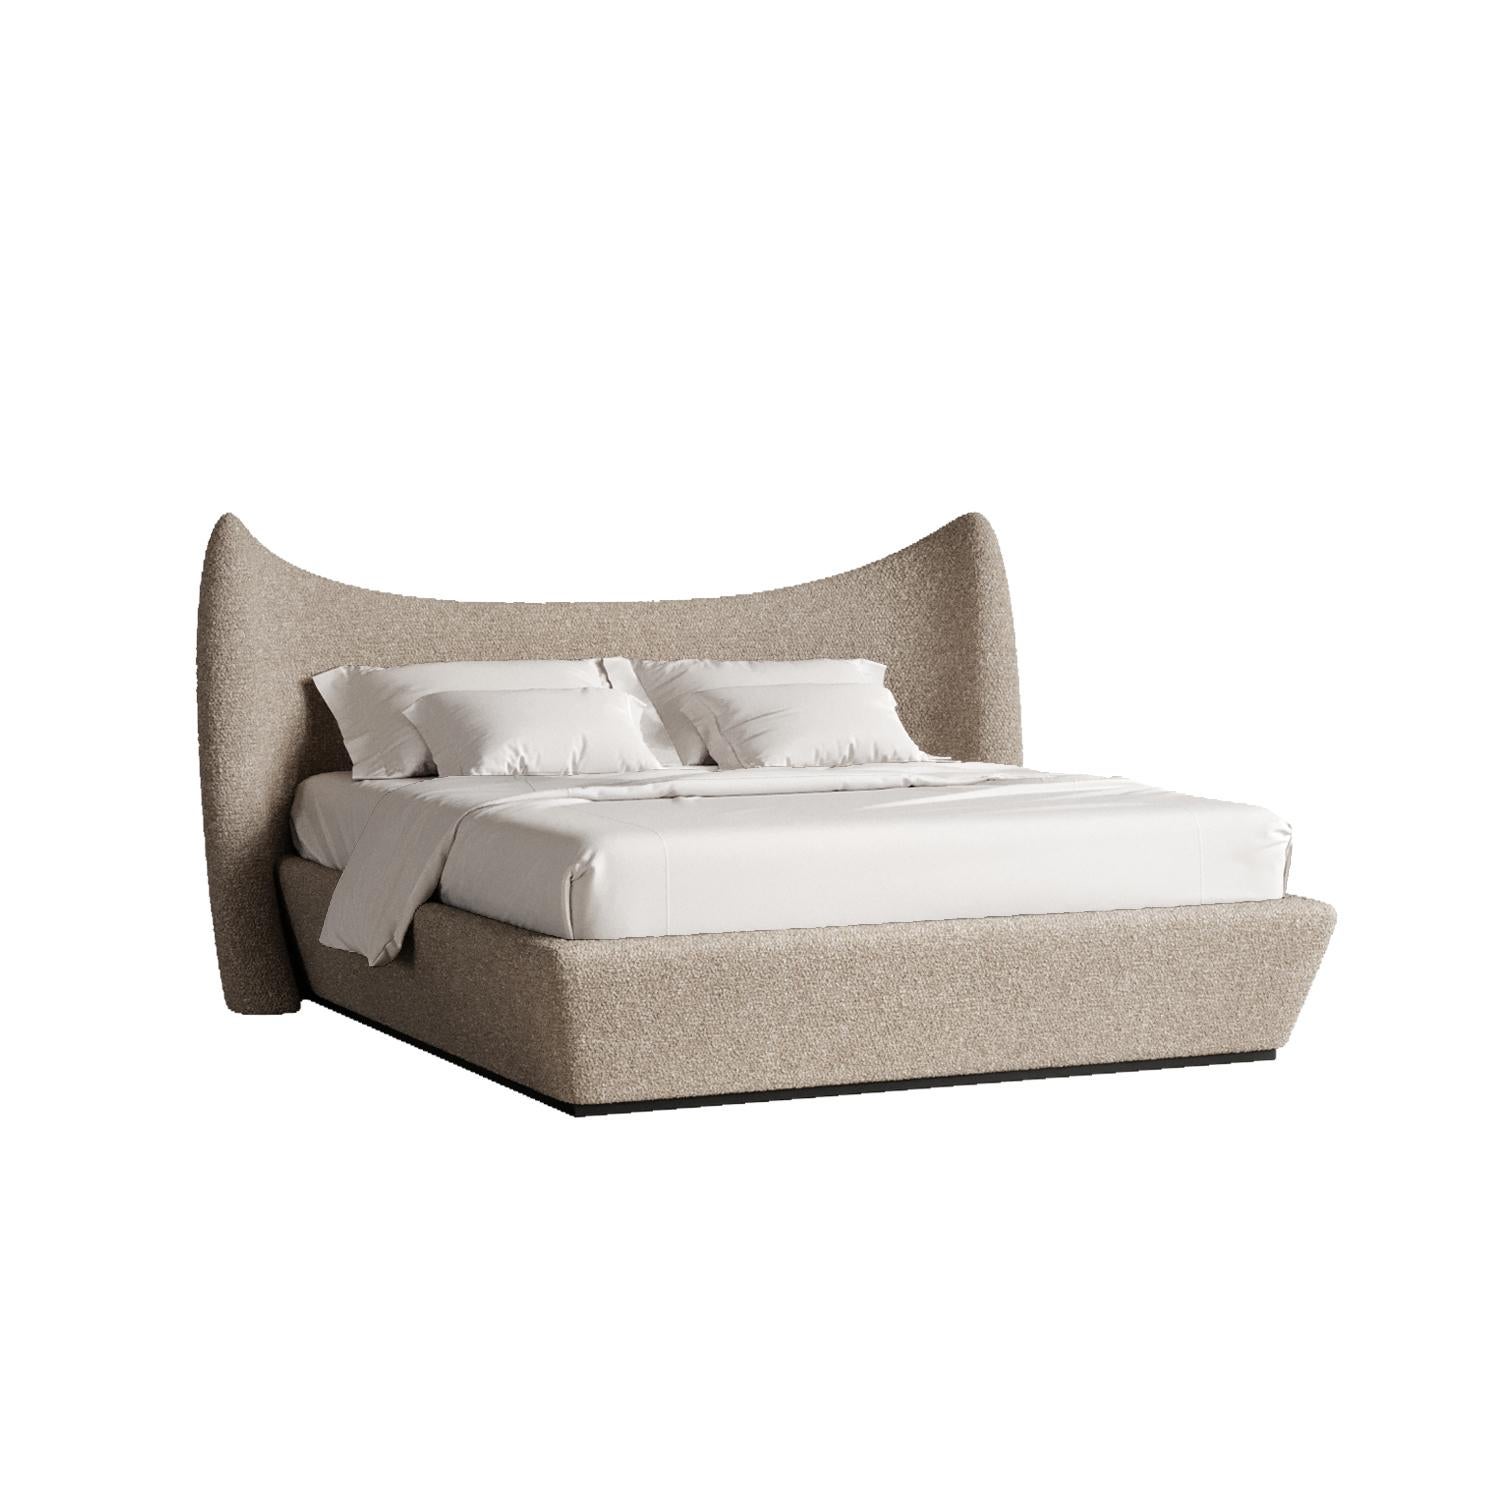 White Memory Sofa by Plyus Design
Dimensions: D 235 x W 245 x H 125 cm
Materials:  Wood, HR foam, polyester wadding, fabric upholstery
Also available in a variety of colors. 

“Memory” Bed.
Collection 